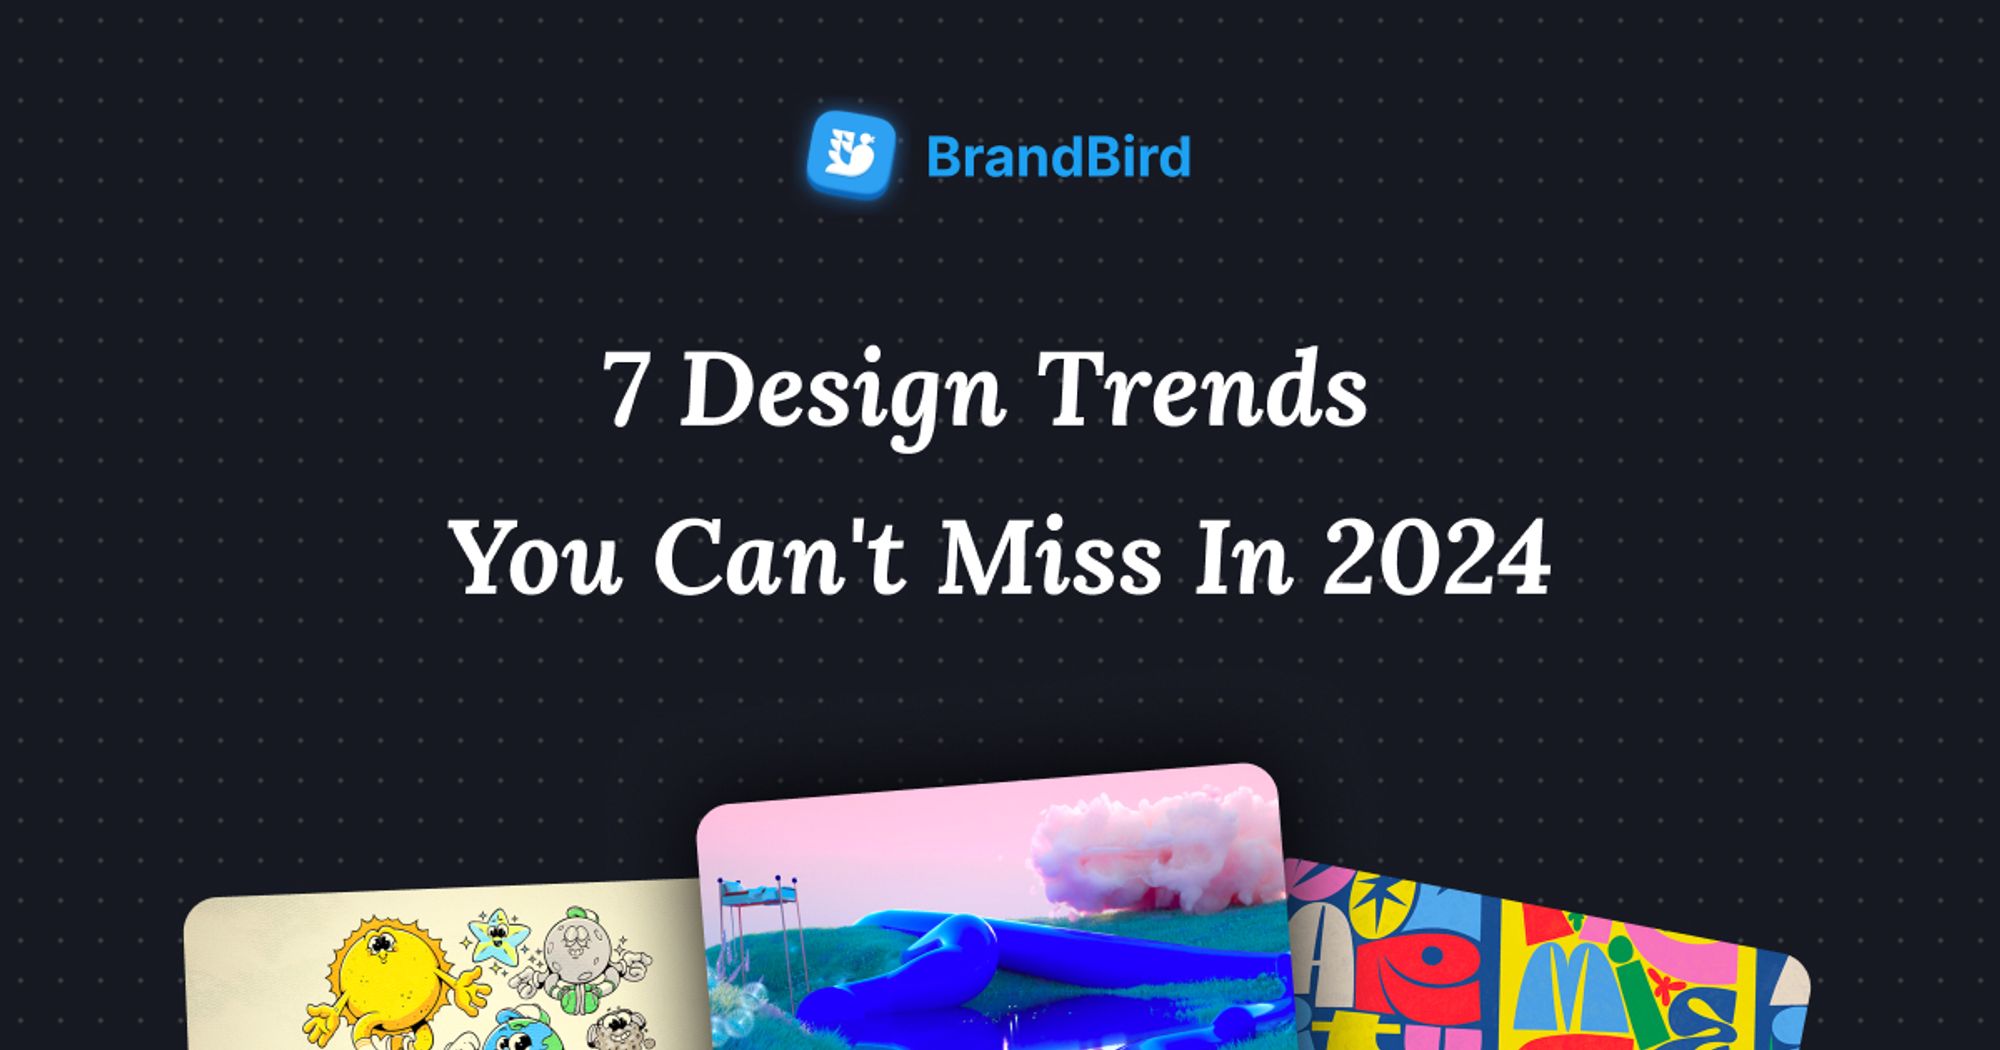 7 Design Trends You Can't Miss in 2024